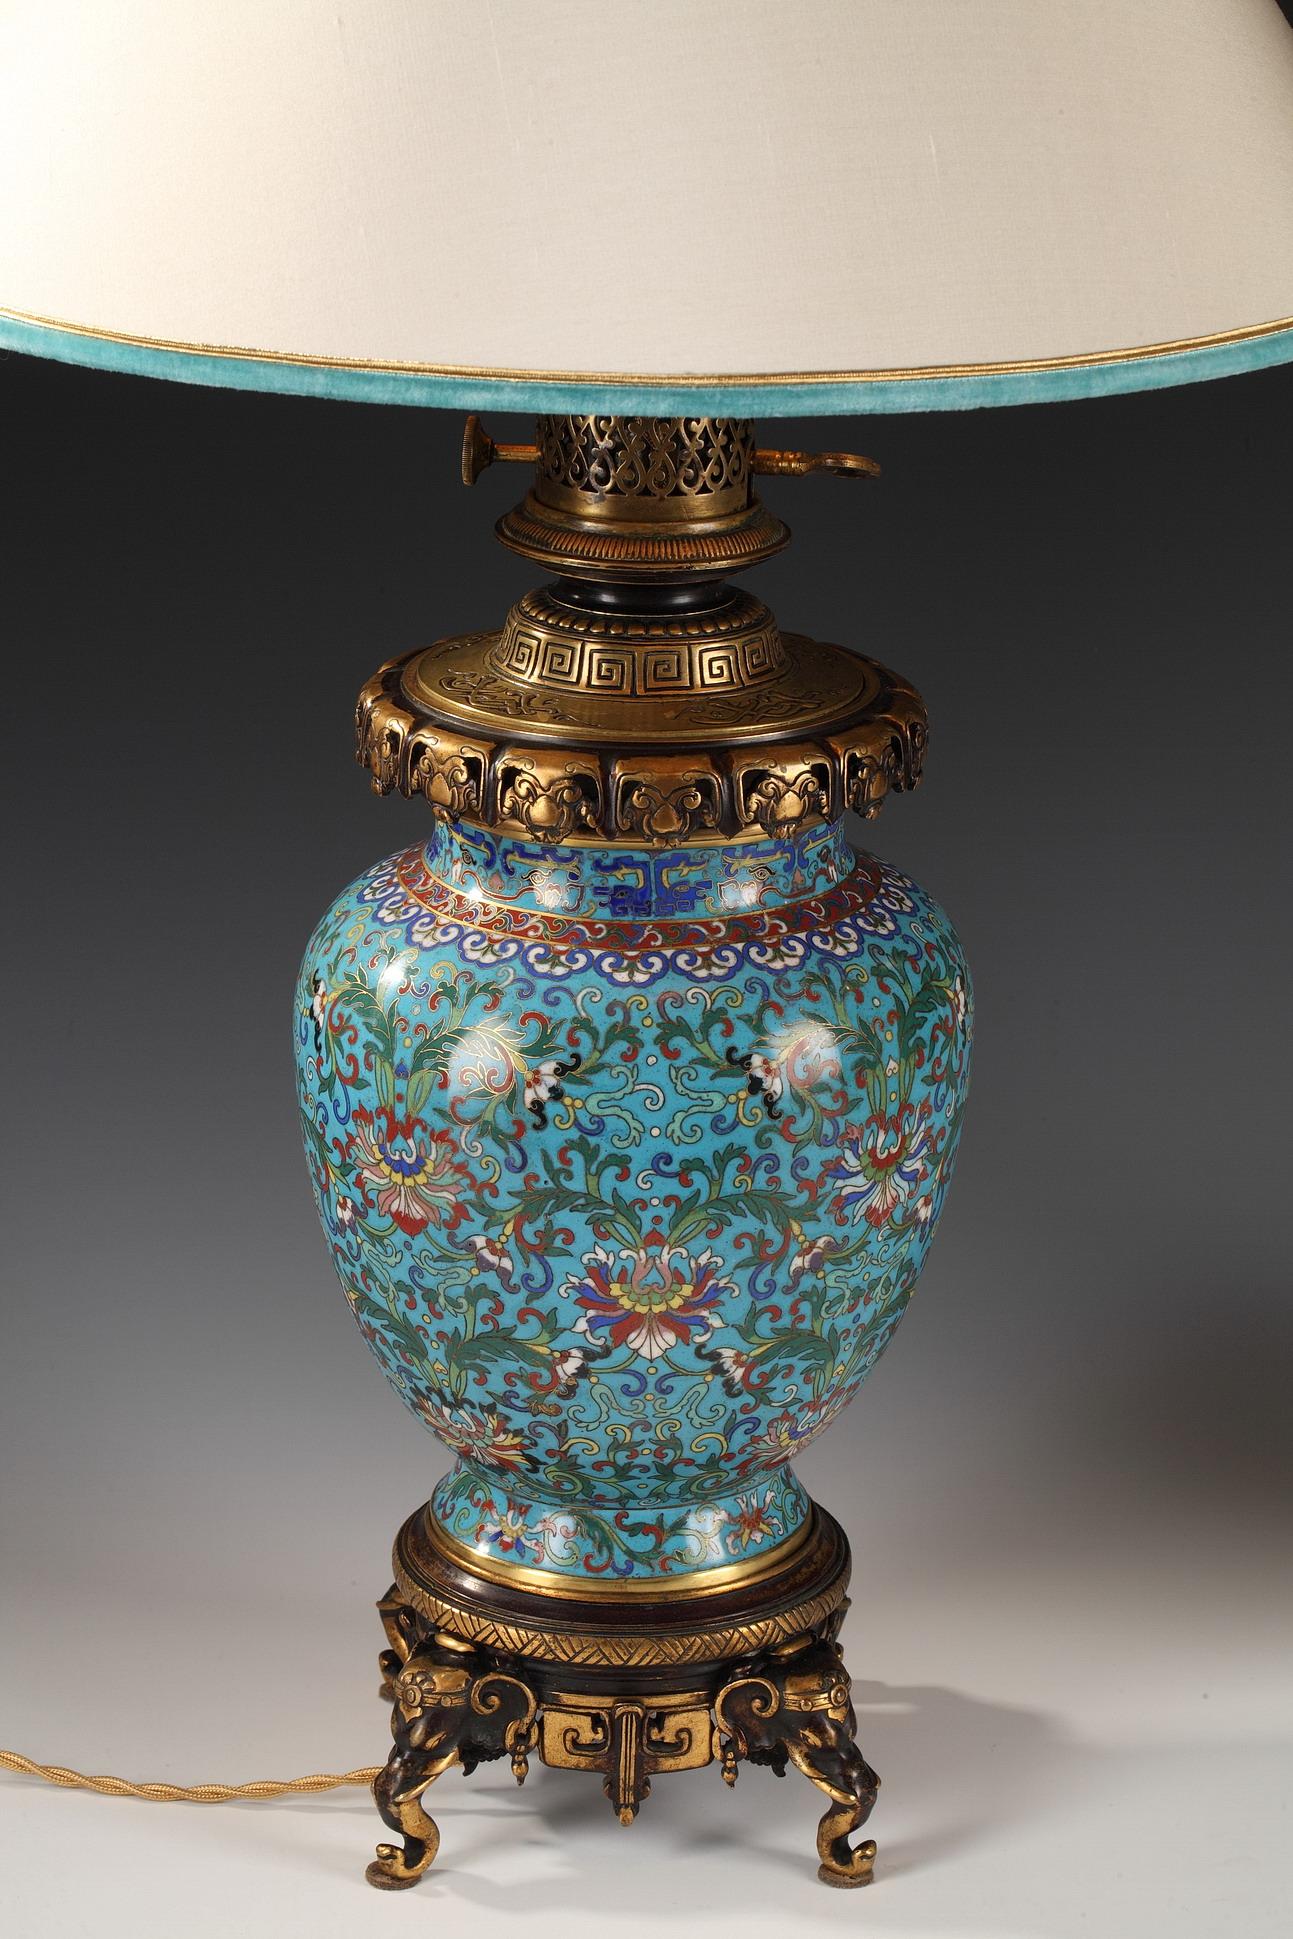 French Fine Pair of Cloisonné Enamel Lamps by Gagneau, France, Circa 1880